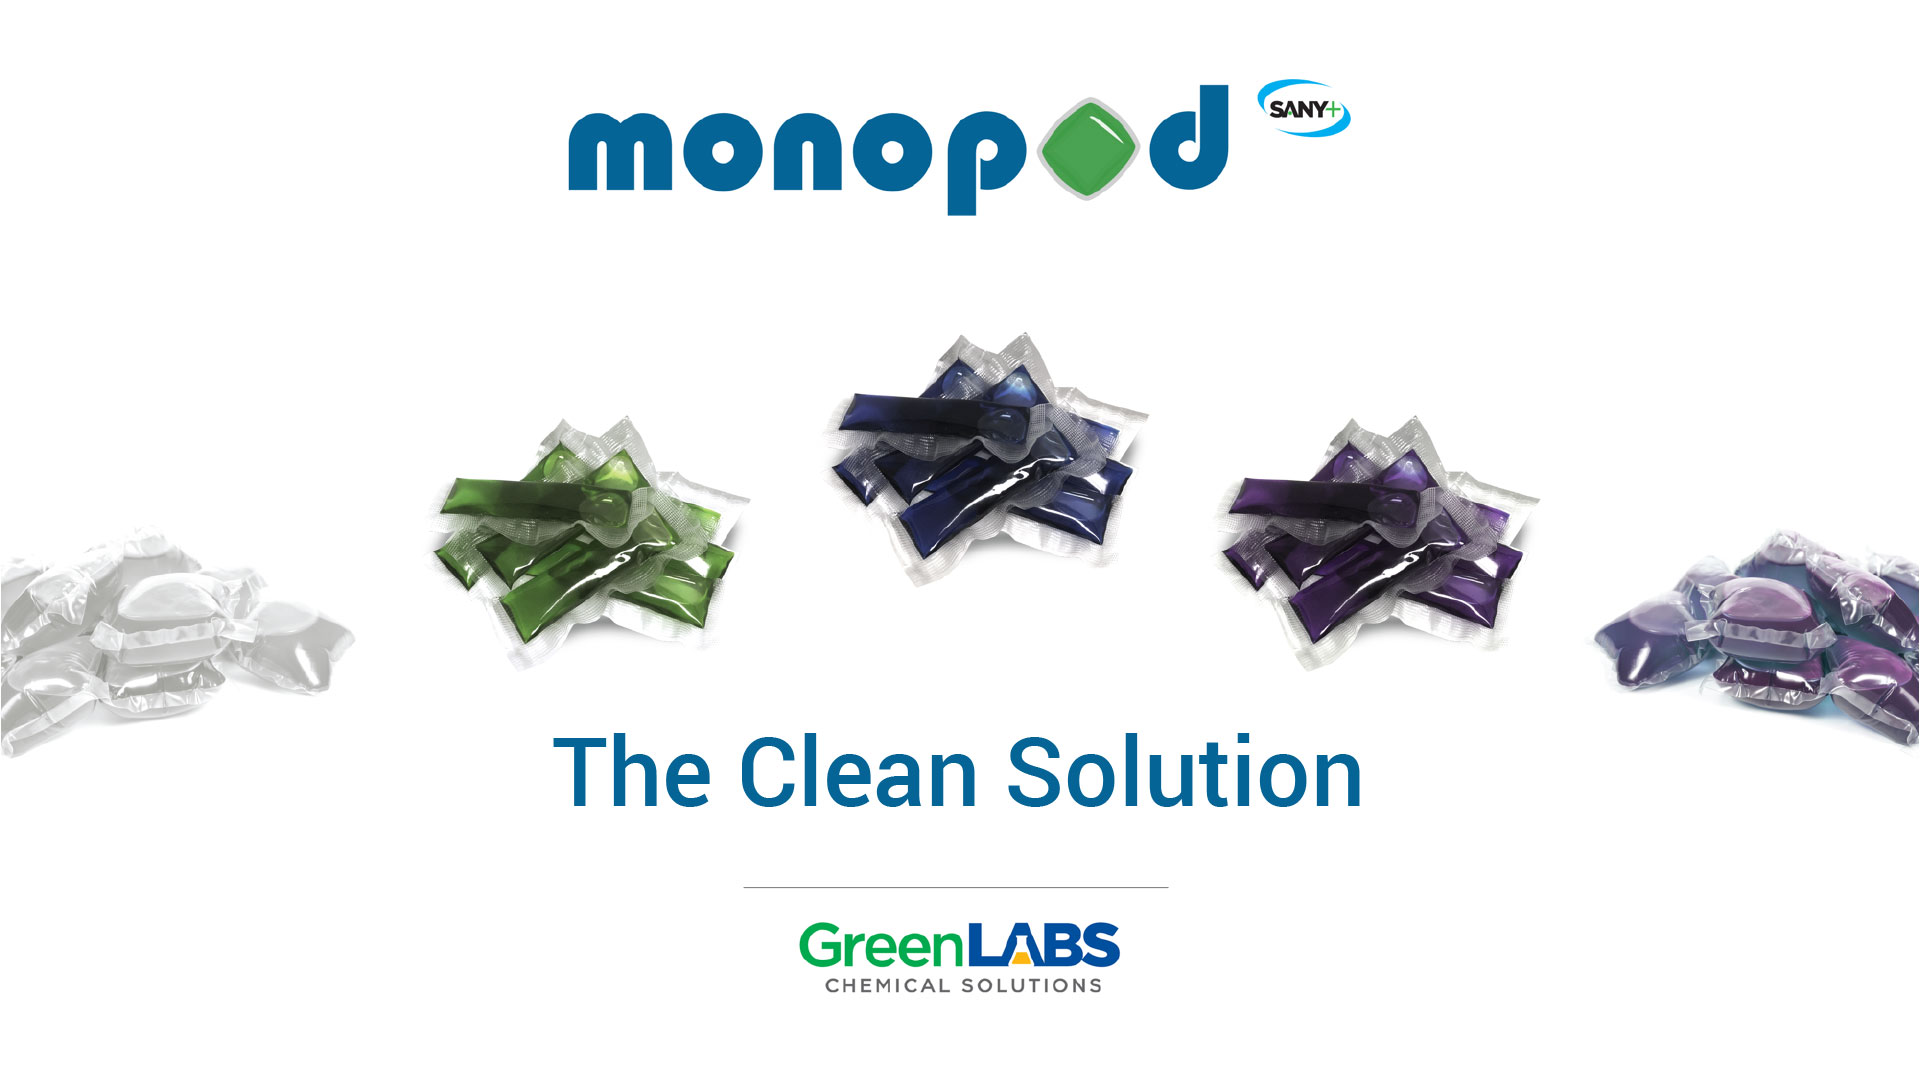 Monopod - The Clean Solution